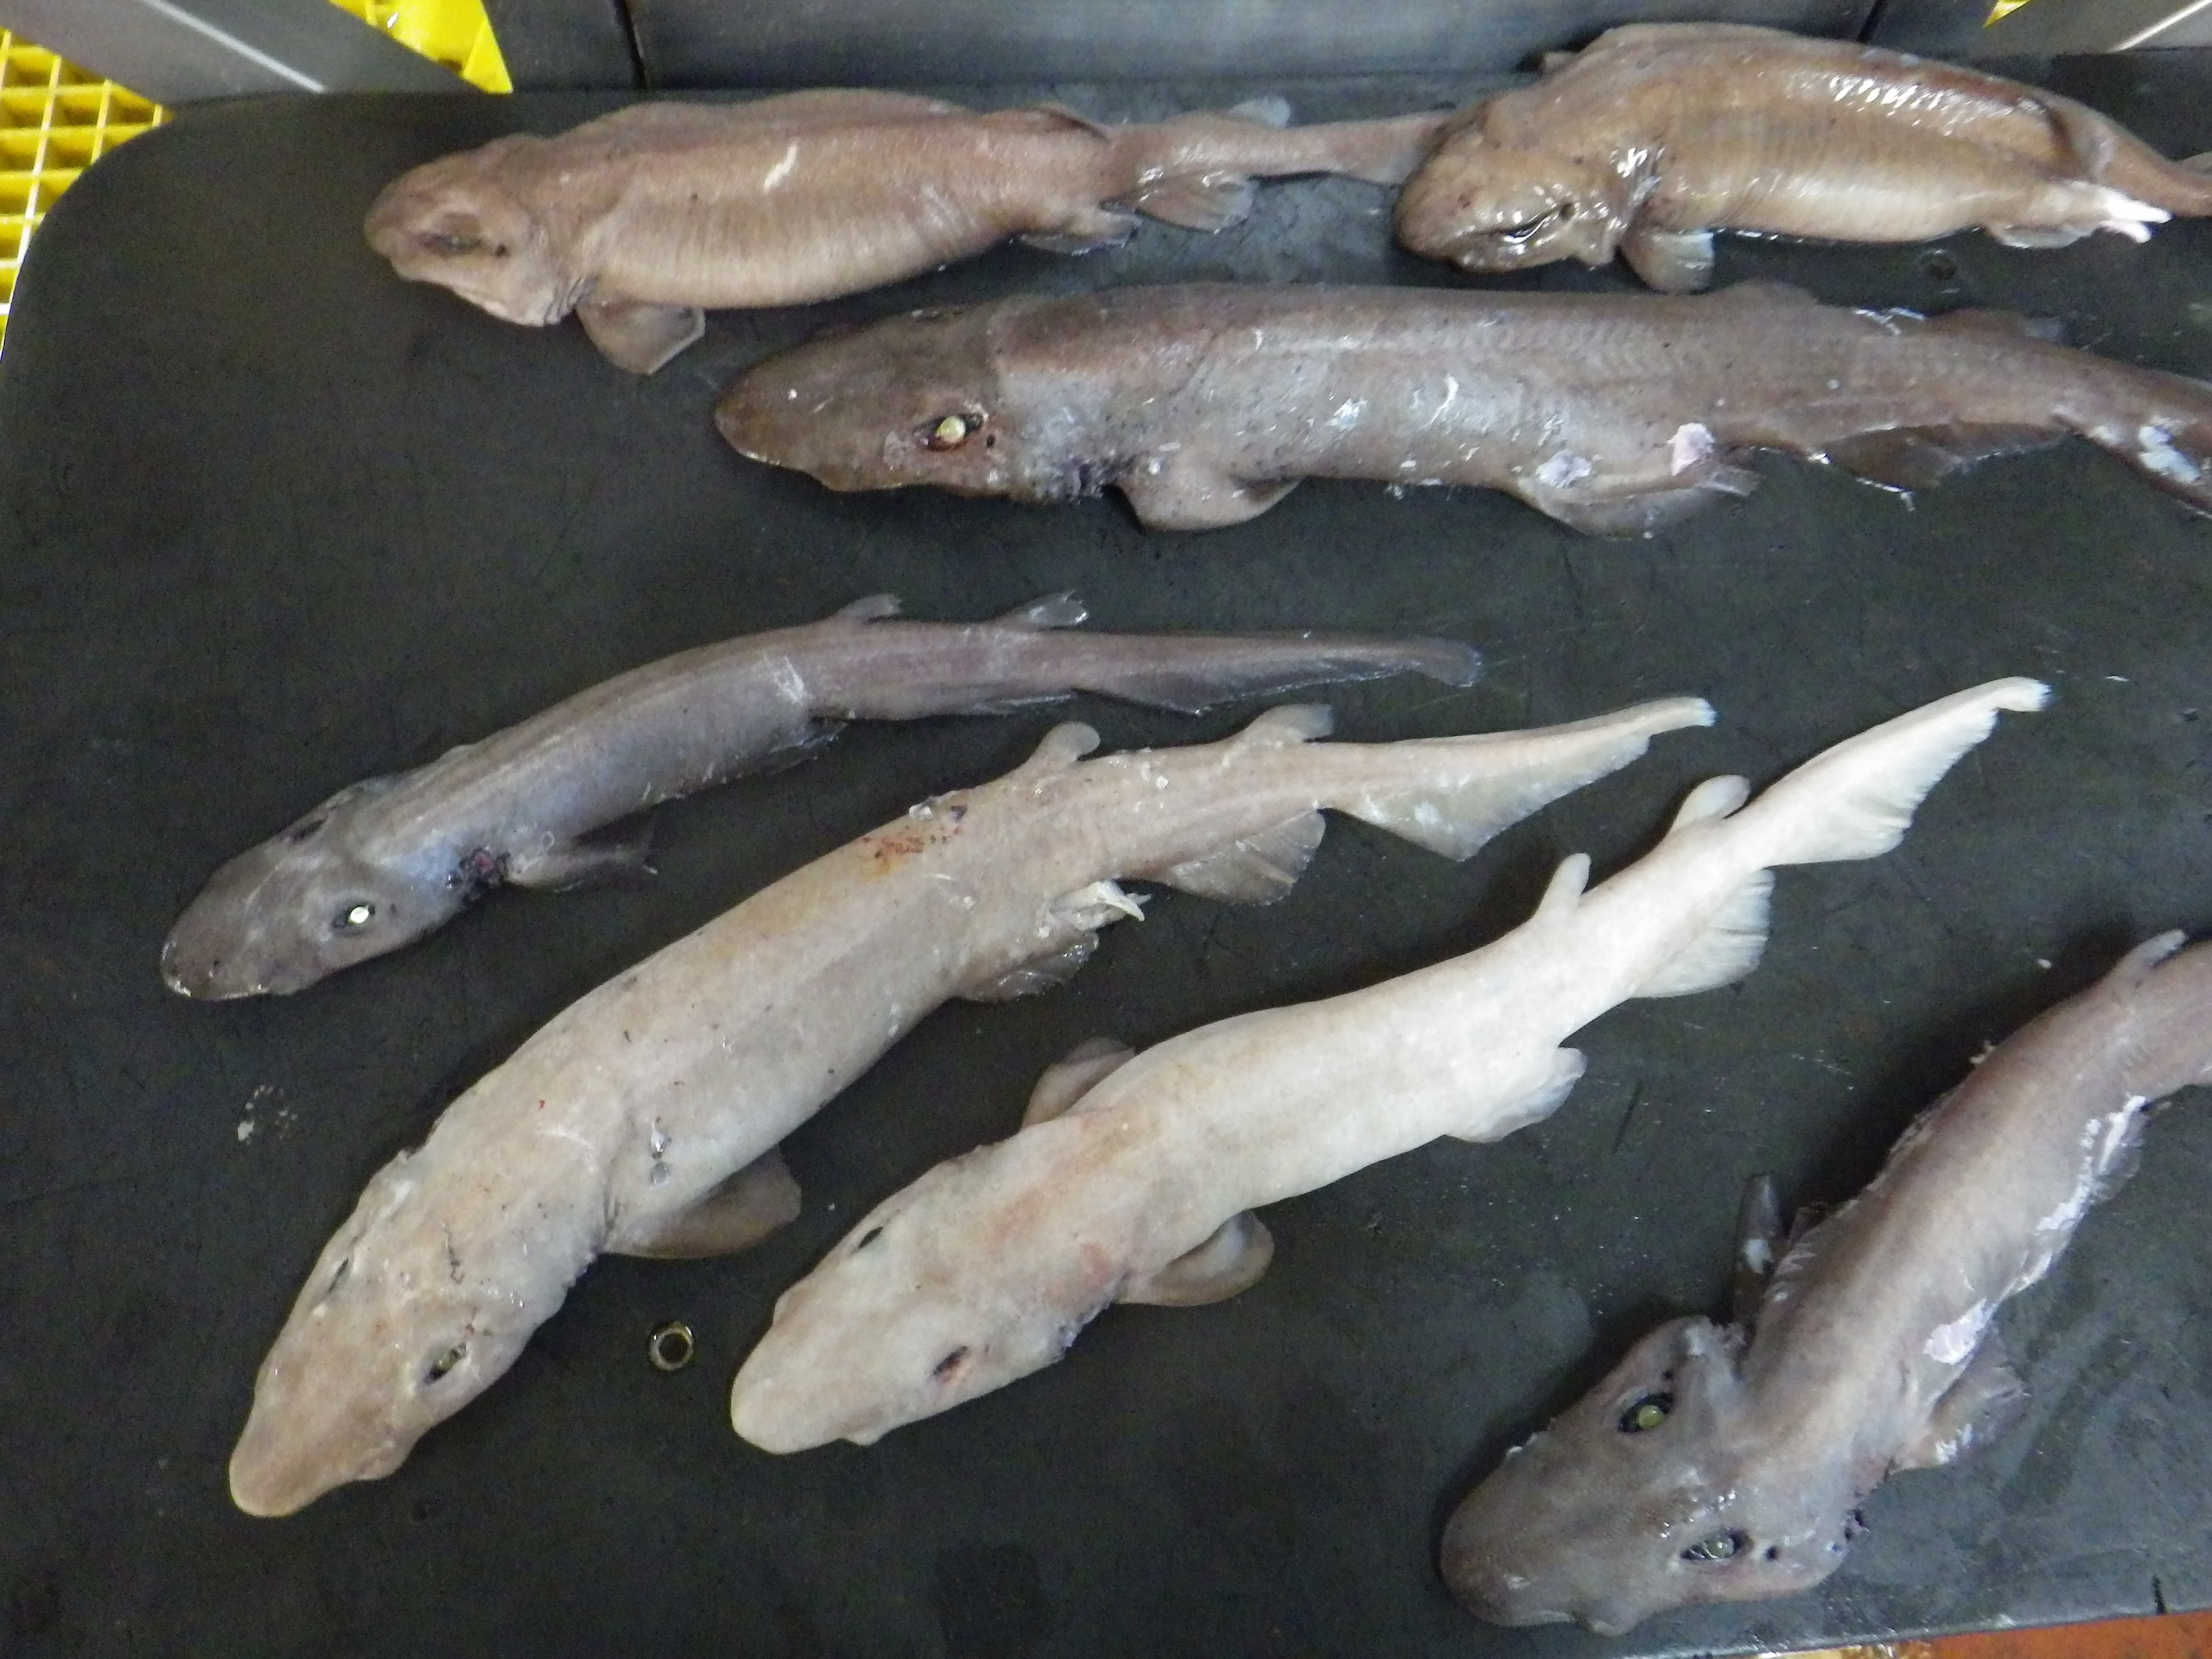 These catsharks might not look like much, but they are all species new to science and currently without formal names.